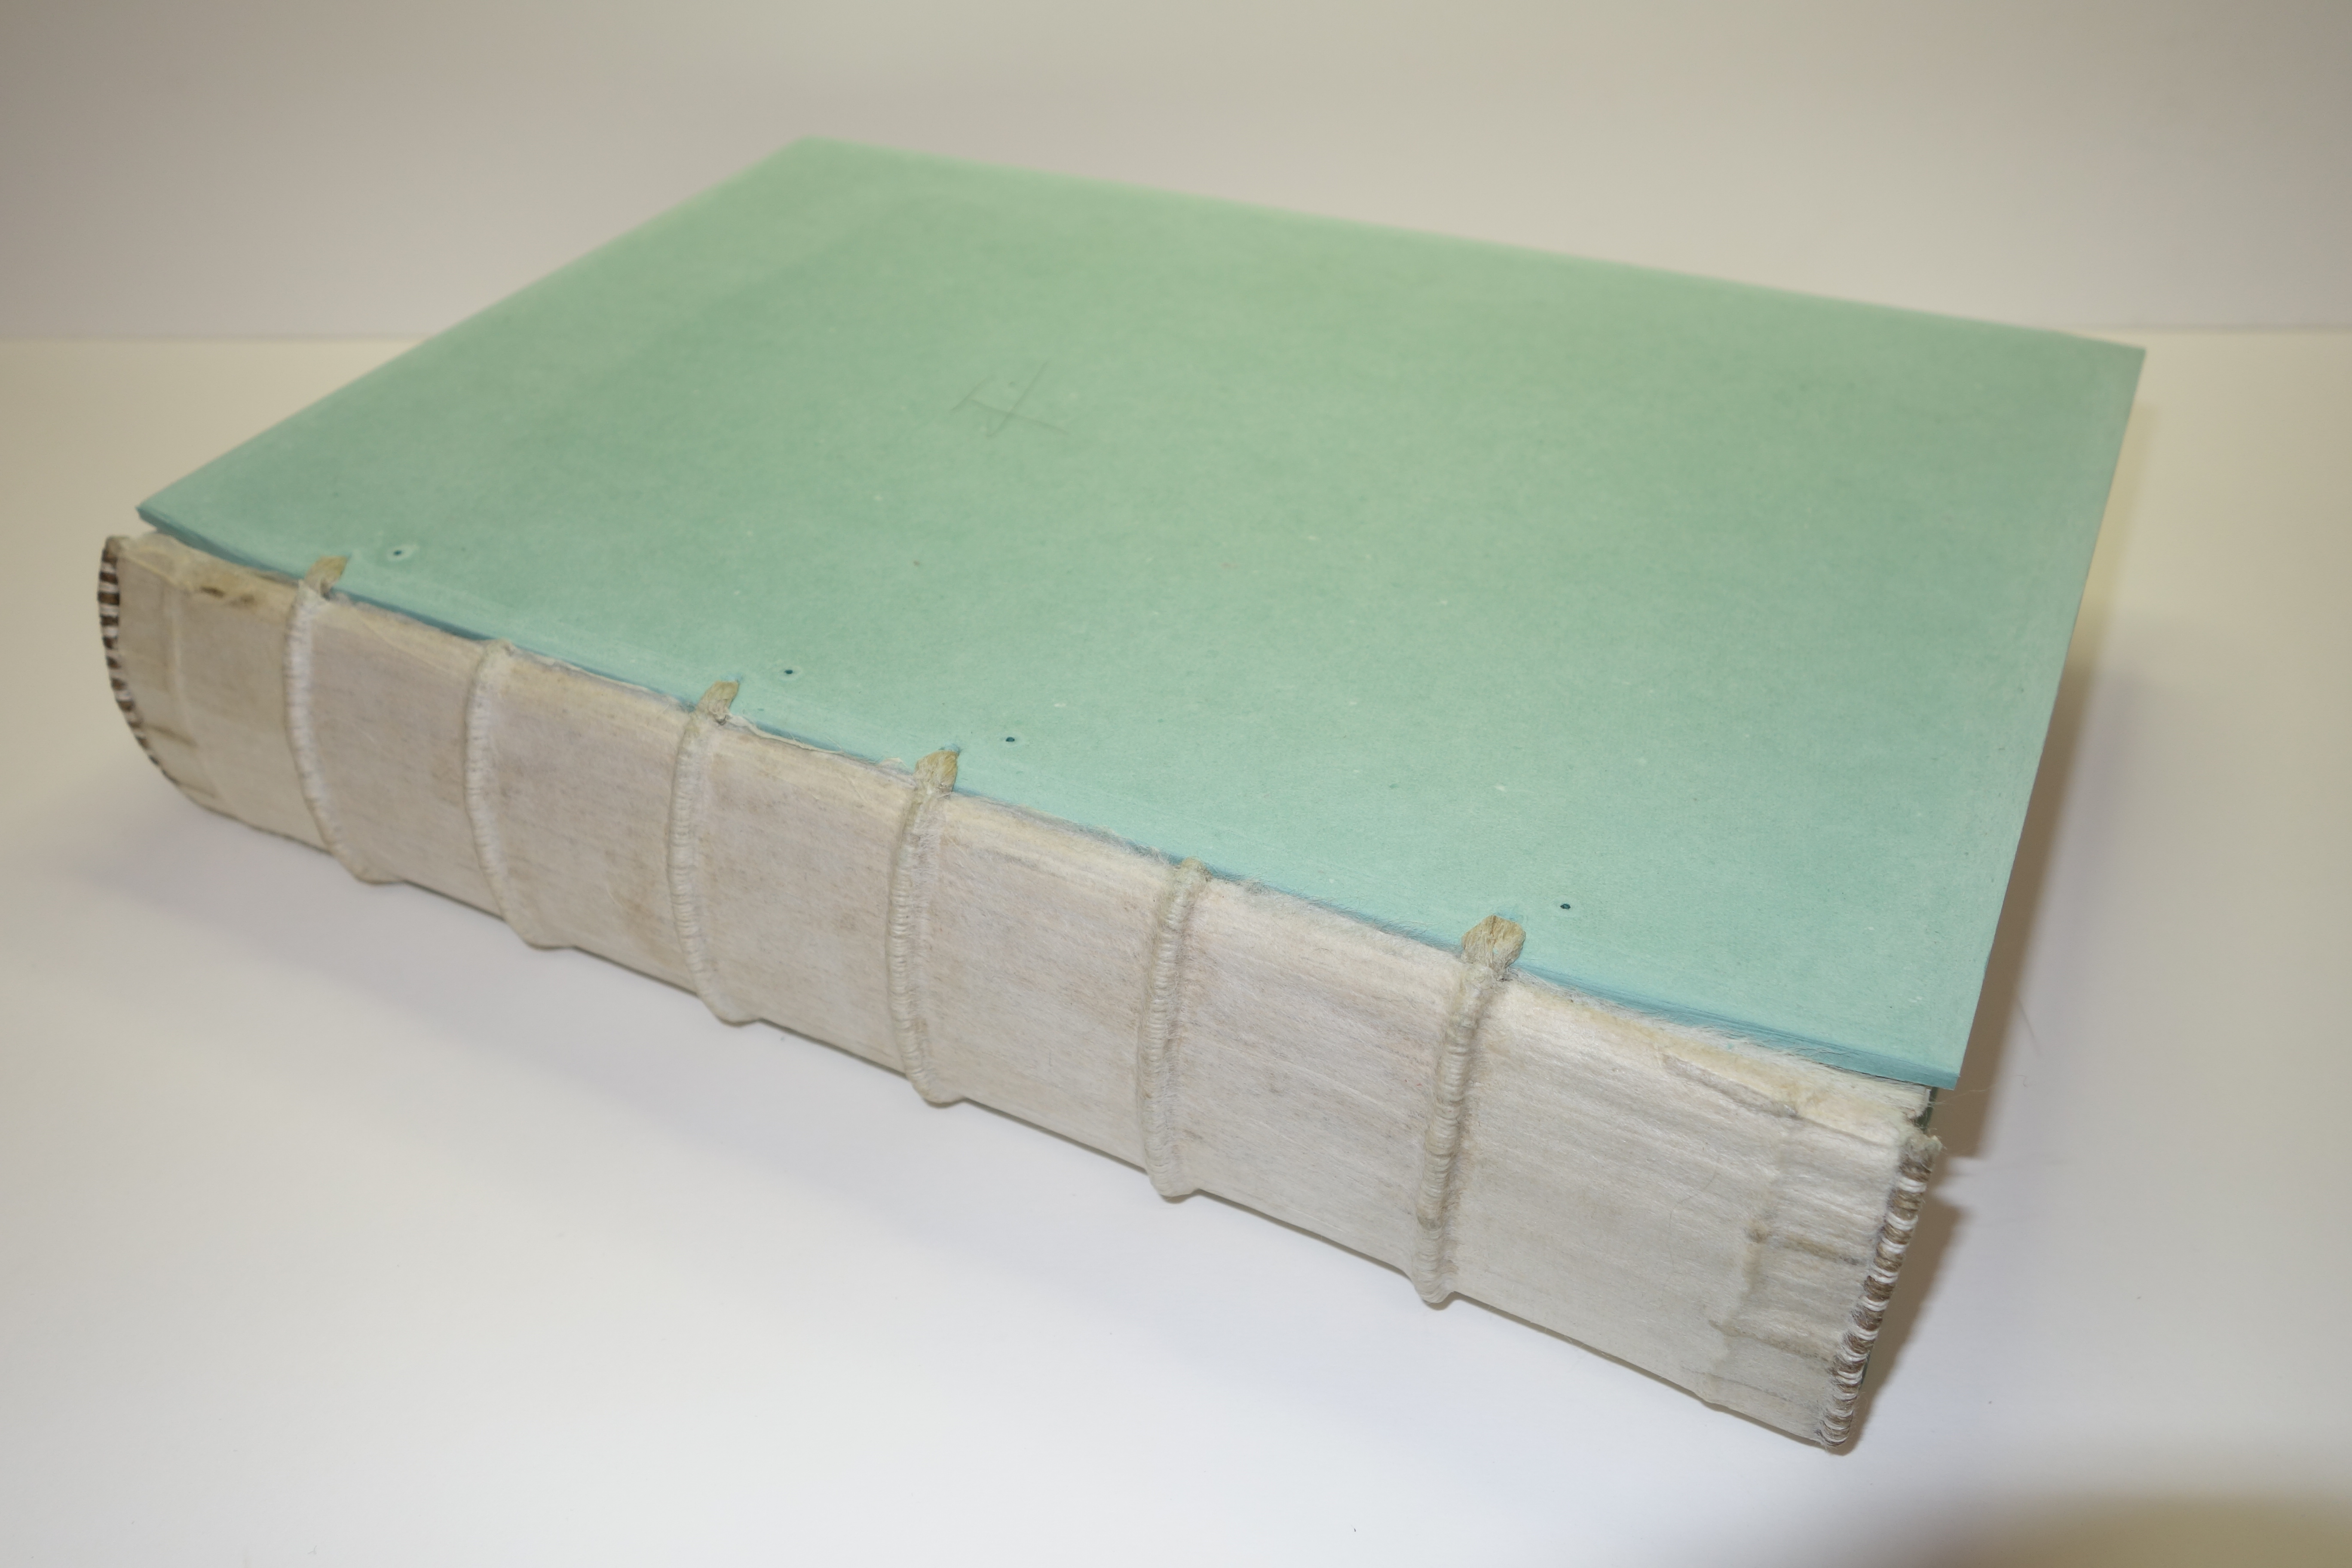 Repaired book with boards attached